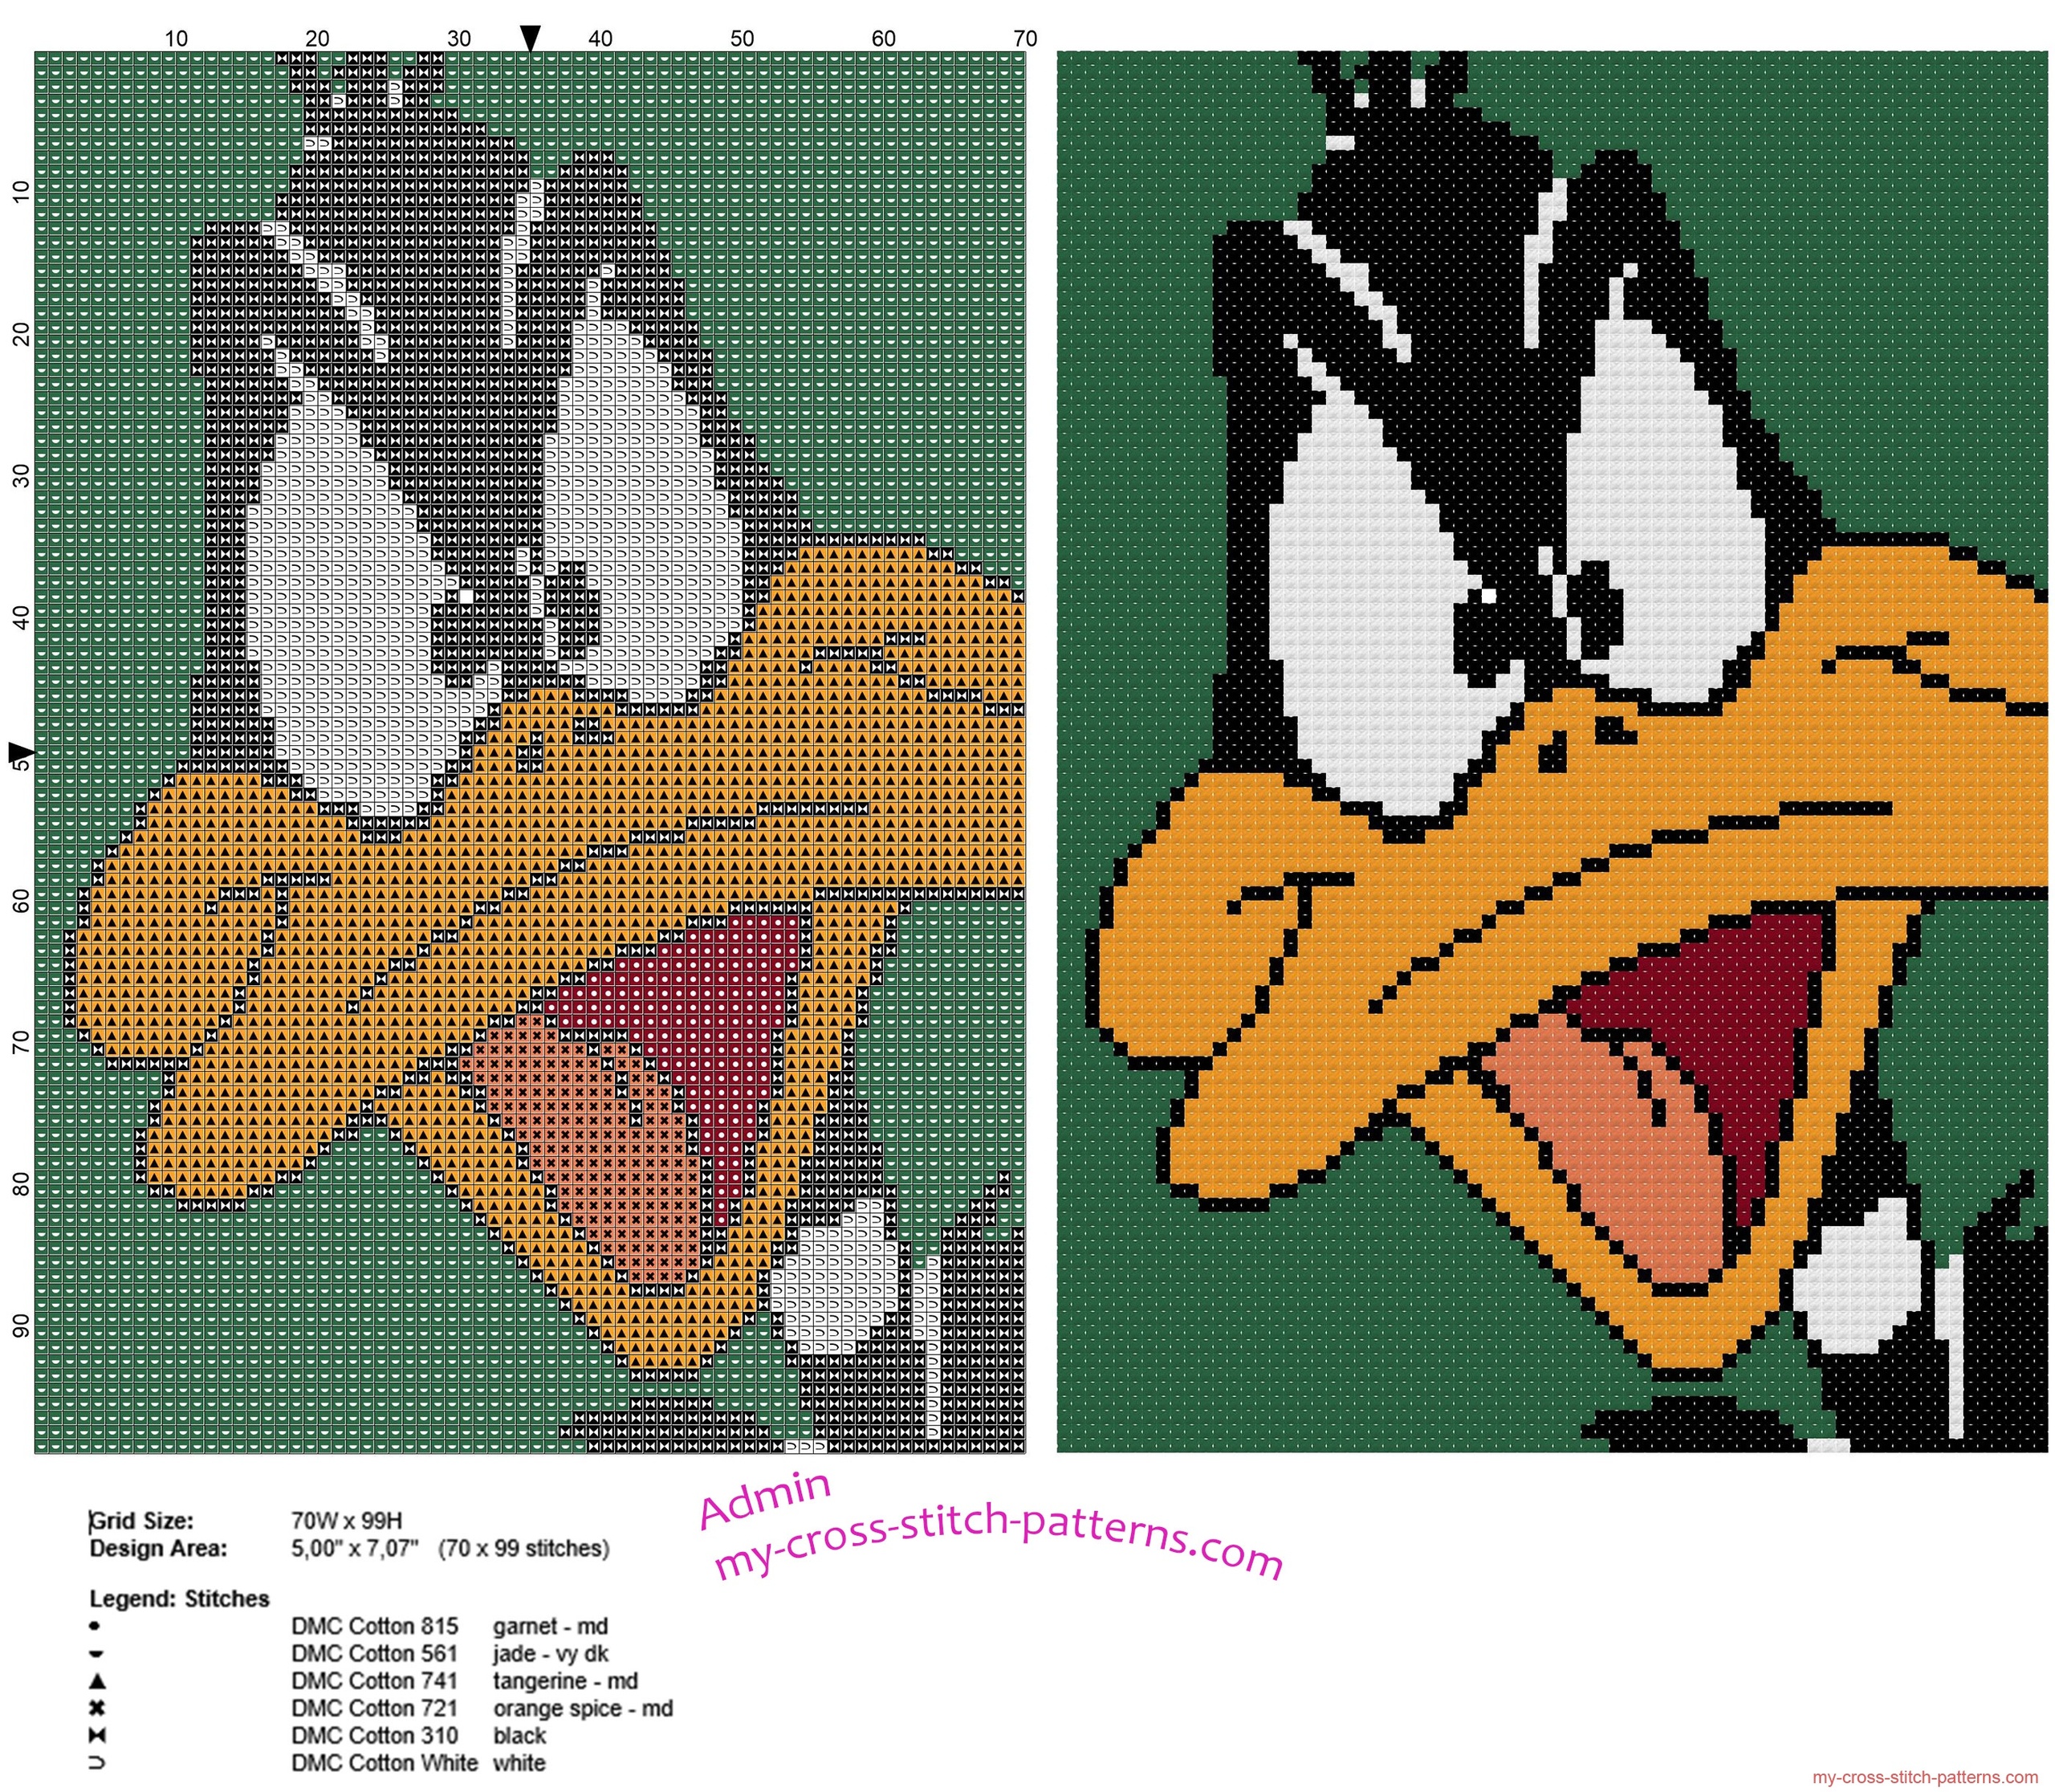 colored_cross_stitch_tile_with_daffy_duck_face